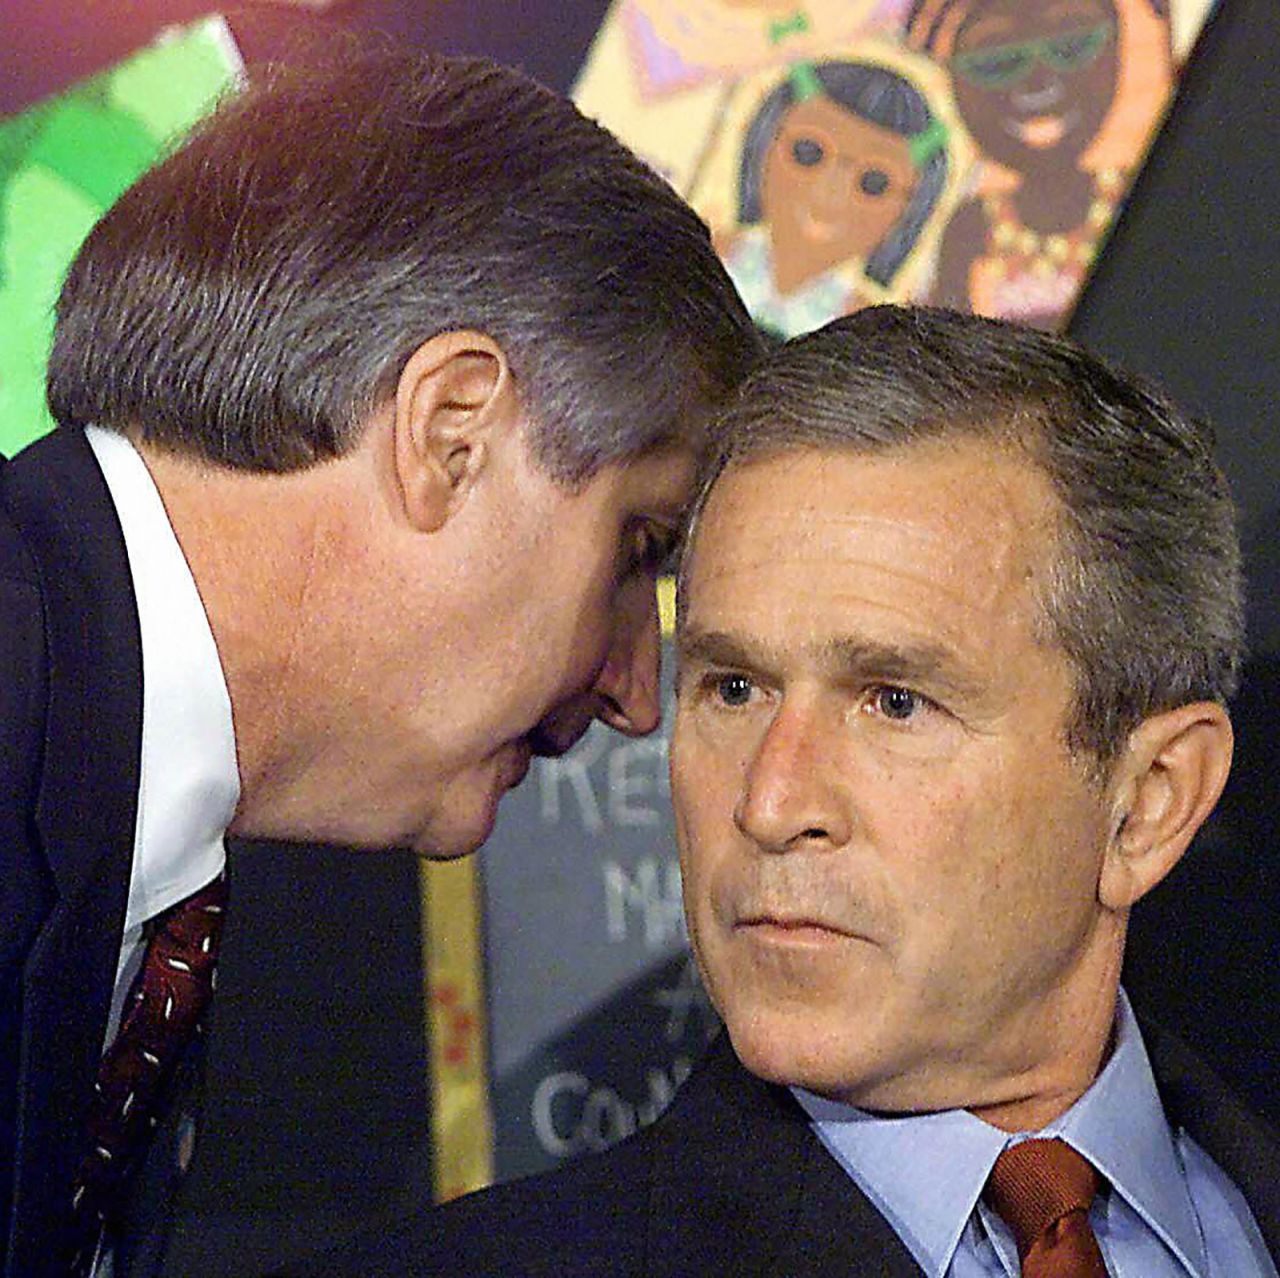 White House Chief of Staff Andrew Card whispers into the ear of US President George W. Bush as Bush was visiting an elementary school in Sarasota, Florida. <a href="http://www.sfgate.com/news/article/9-11-Voices-What-If-You-Had-To-Tell-The-2799179.php" target="_blank" target="_blank">"America is under attack," he said.</a>